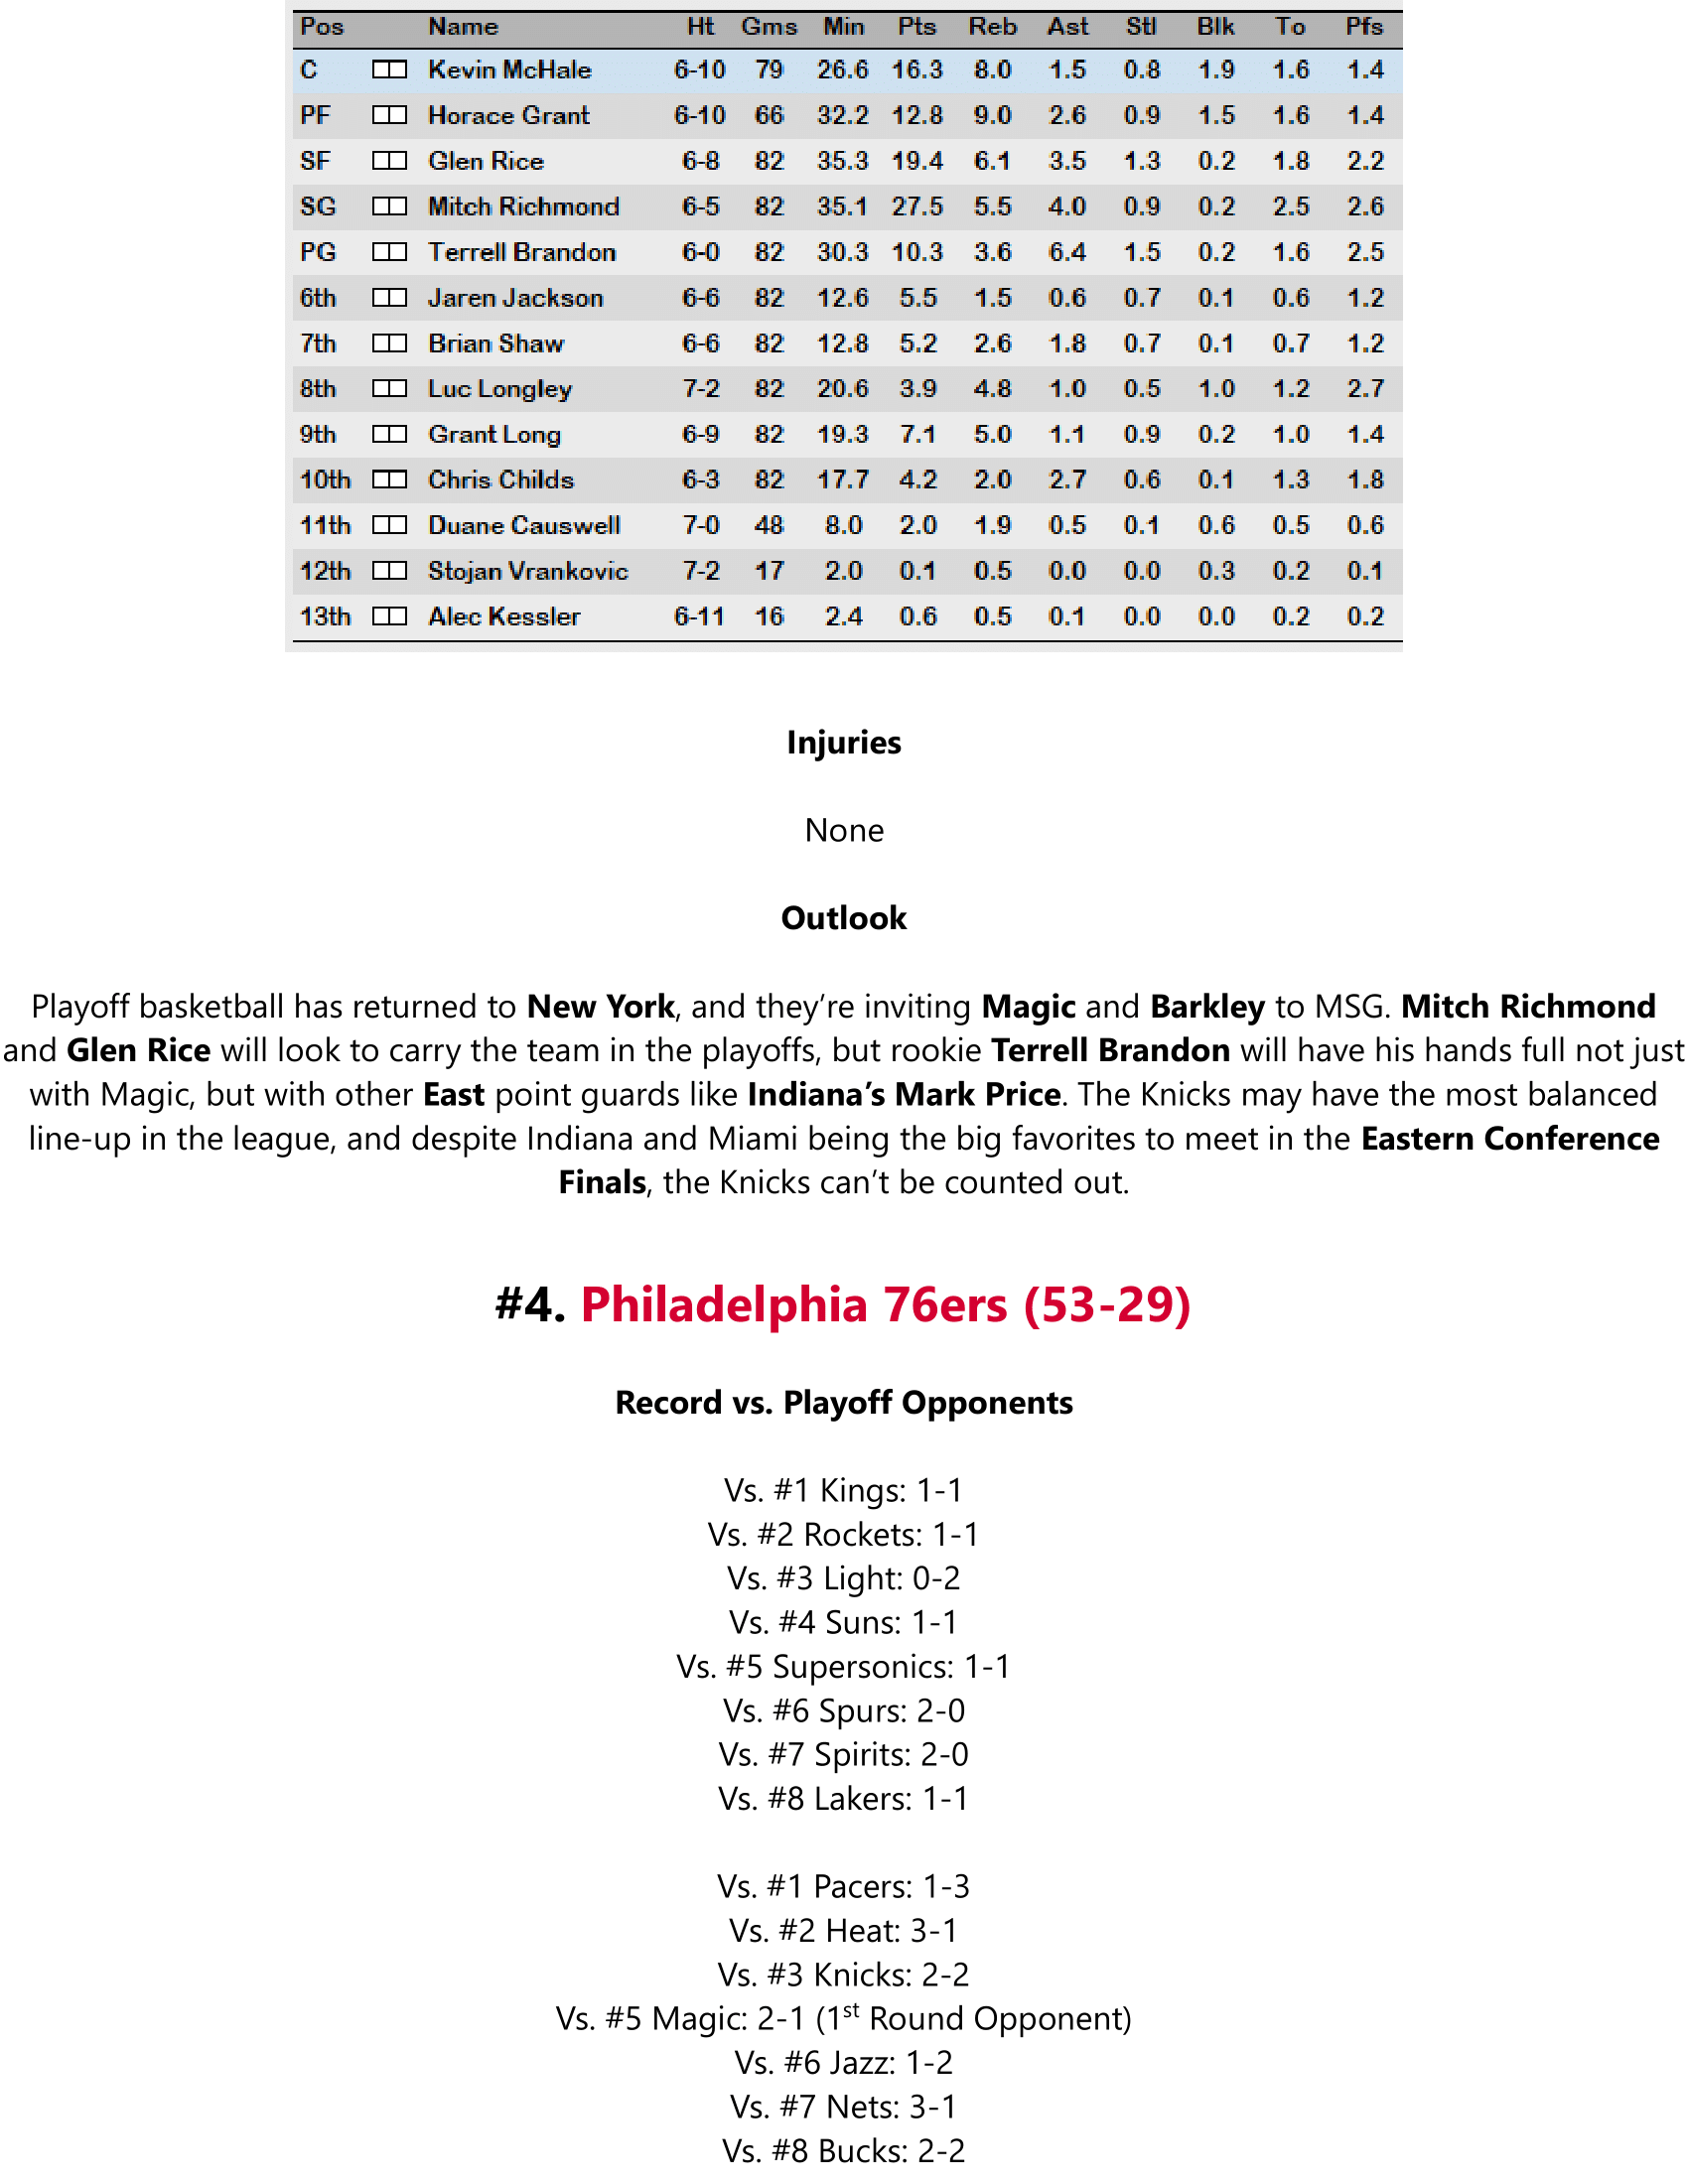 91-92-Part-4-Playoff-Preview-18.png